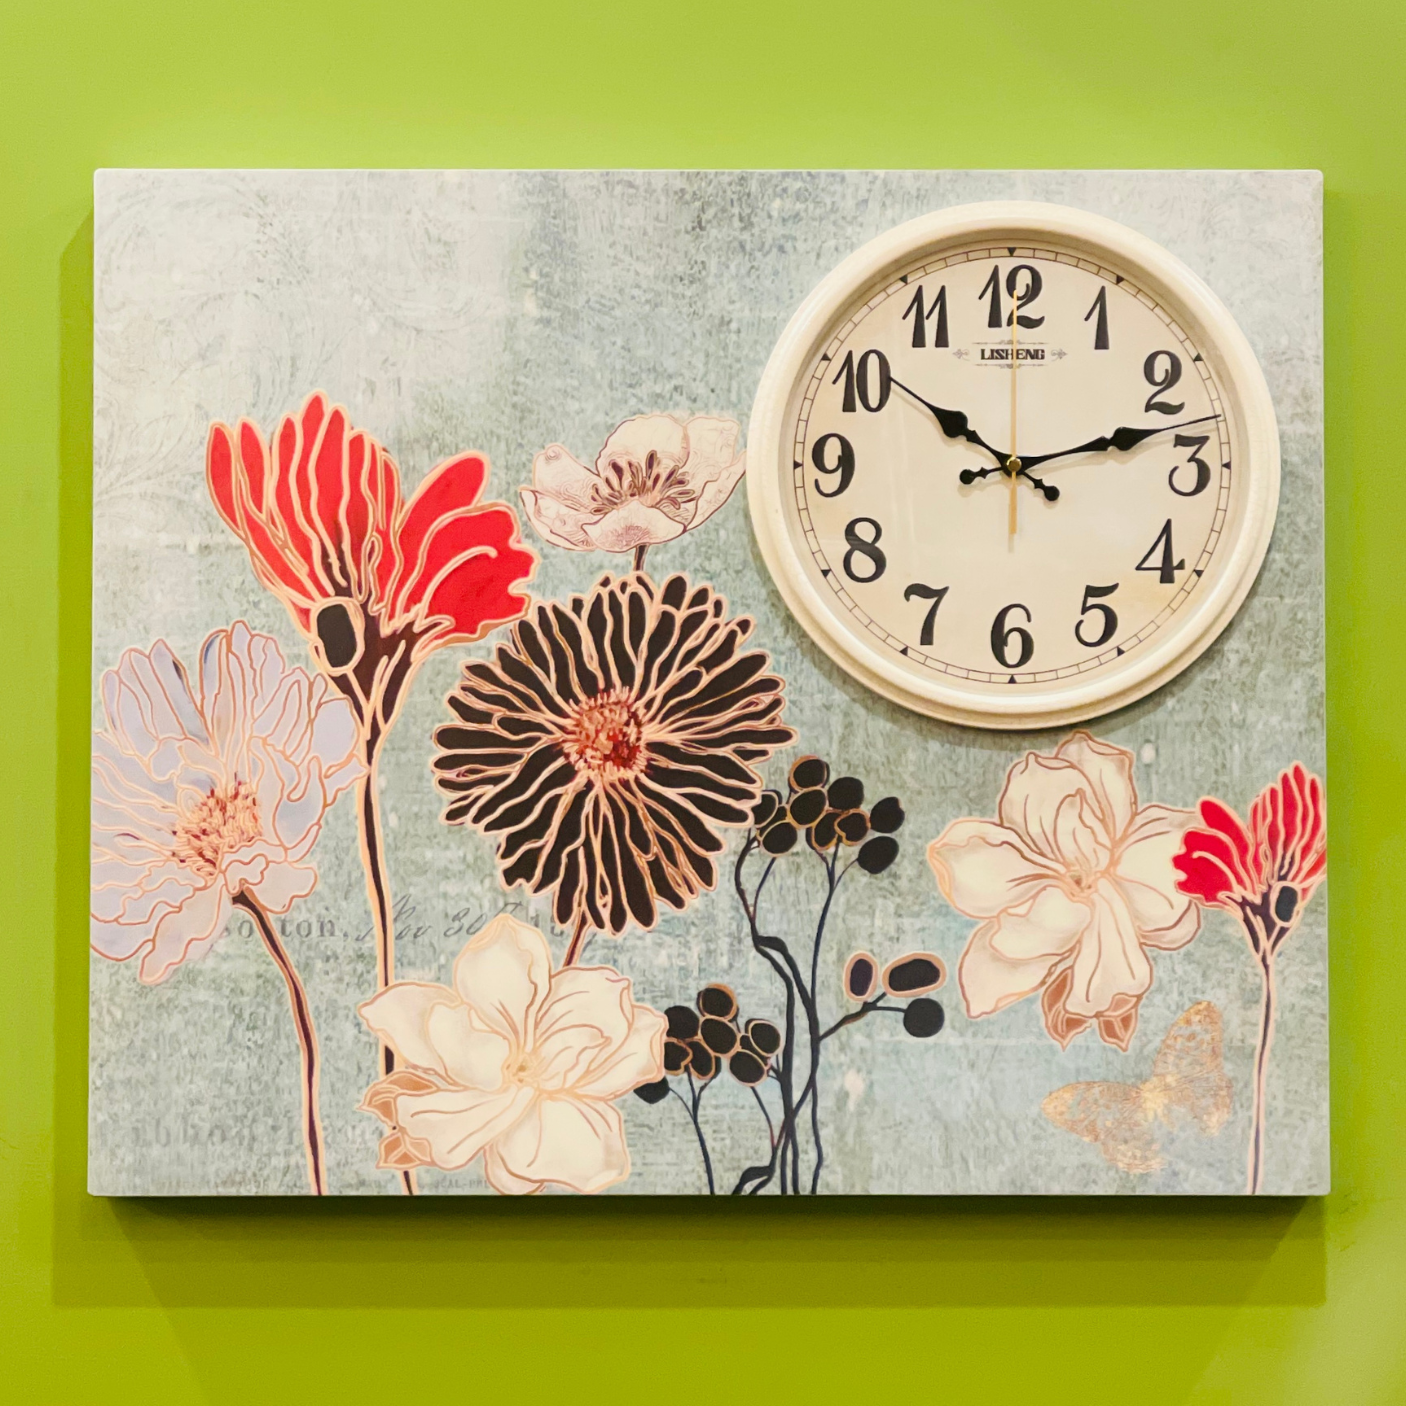 CHARLING WALL CLOCK WITH FLOWERS SCENERY ART FRAME